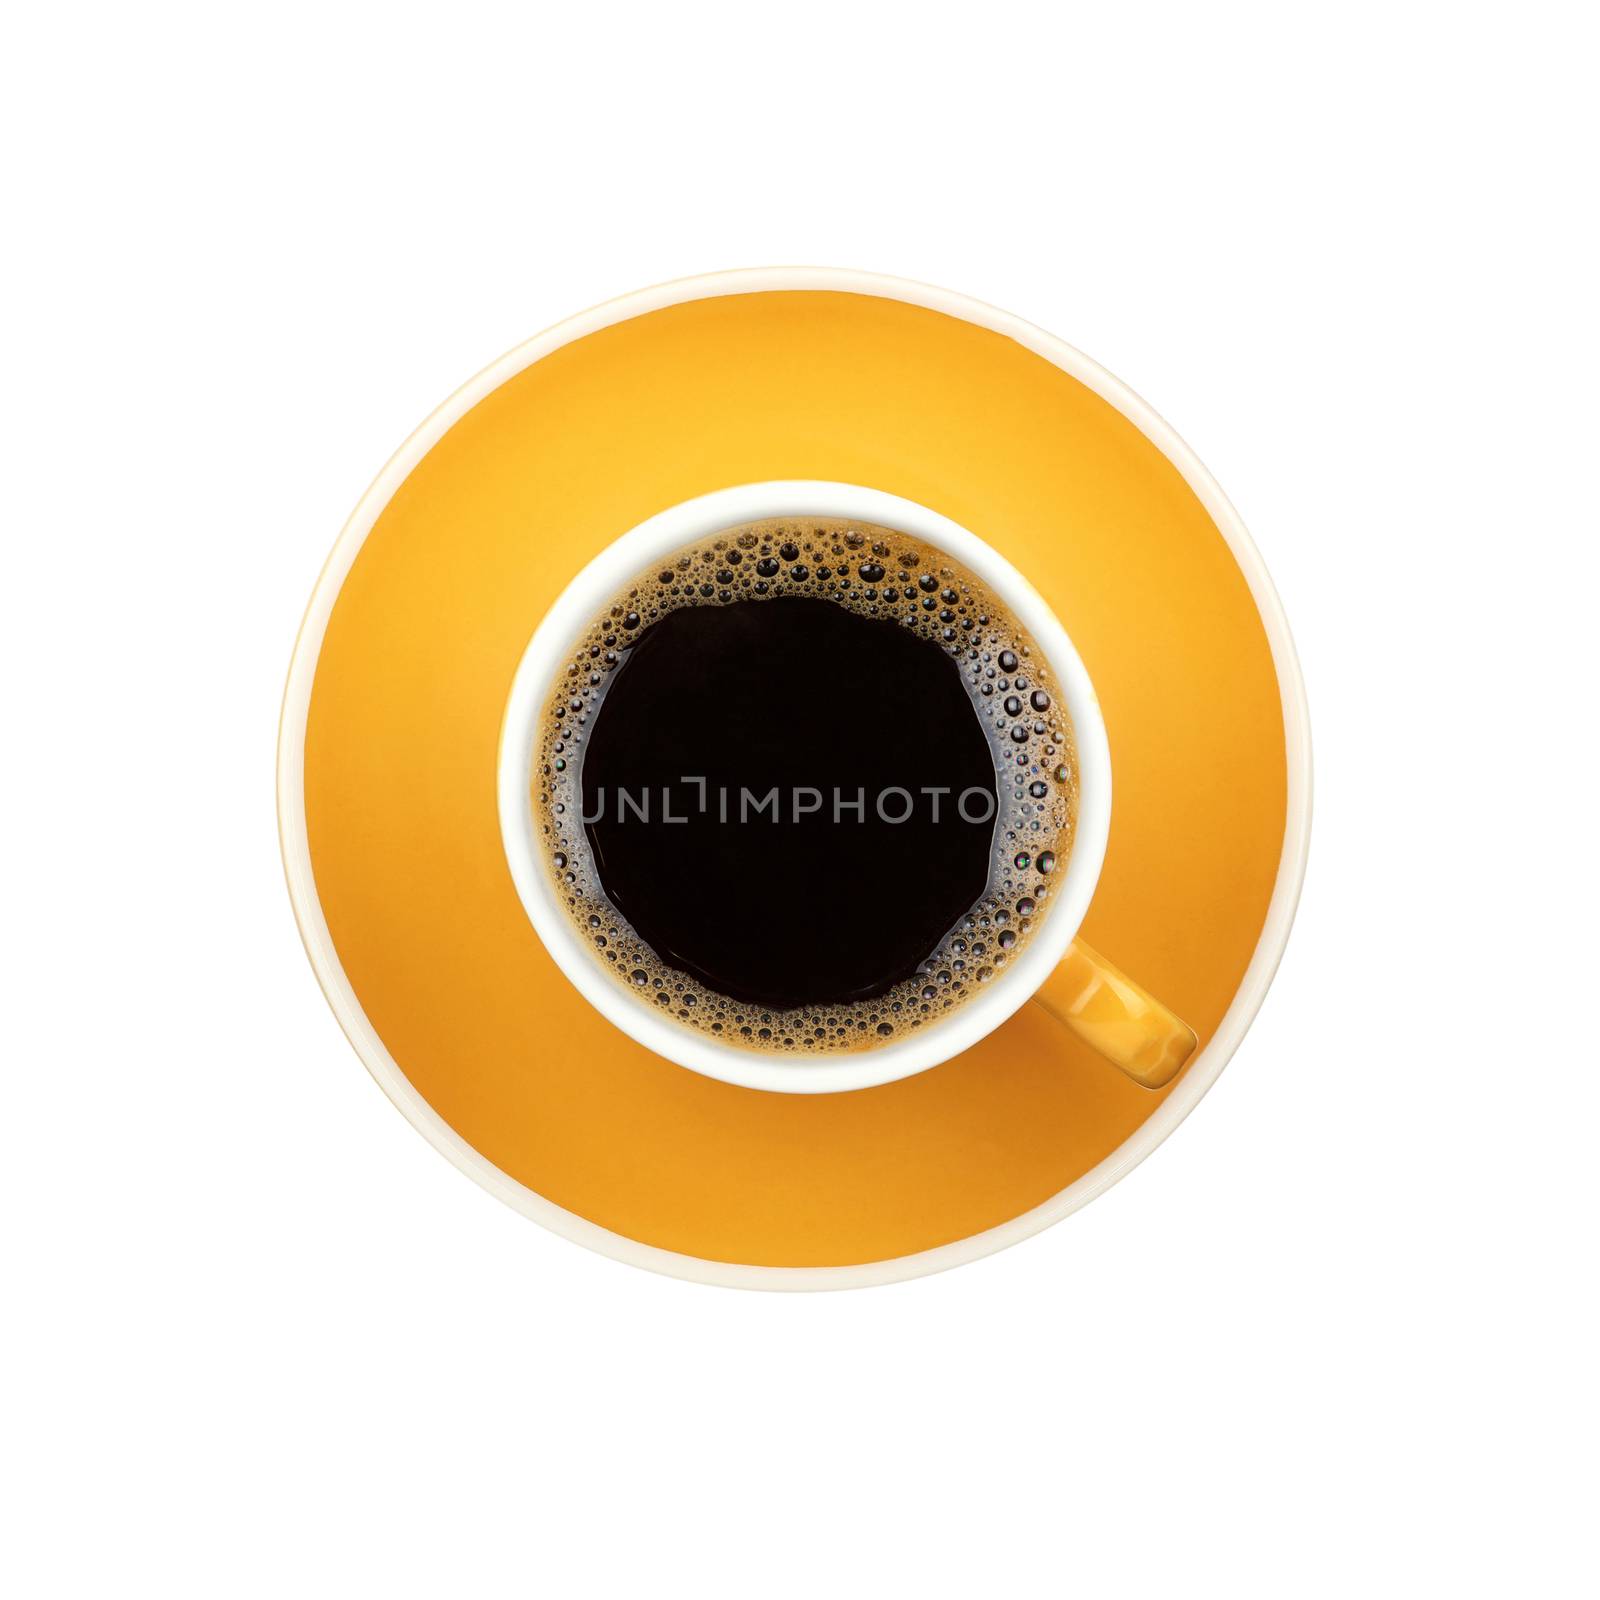 Full Americano black filtered coffee in small yellow cup with saucer isolated on white background, elevated top view, close up